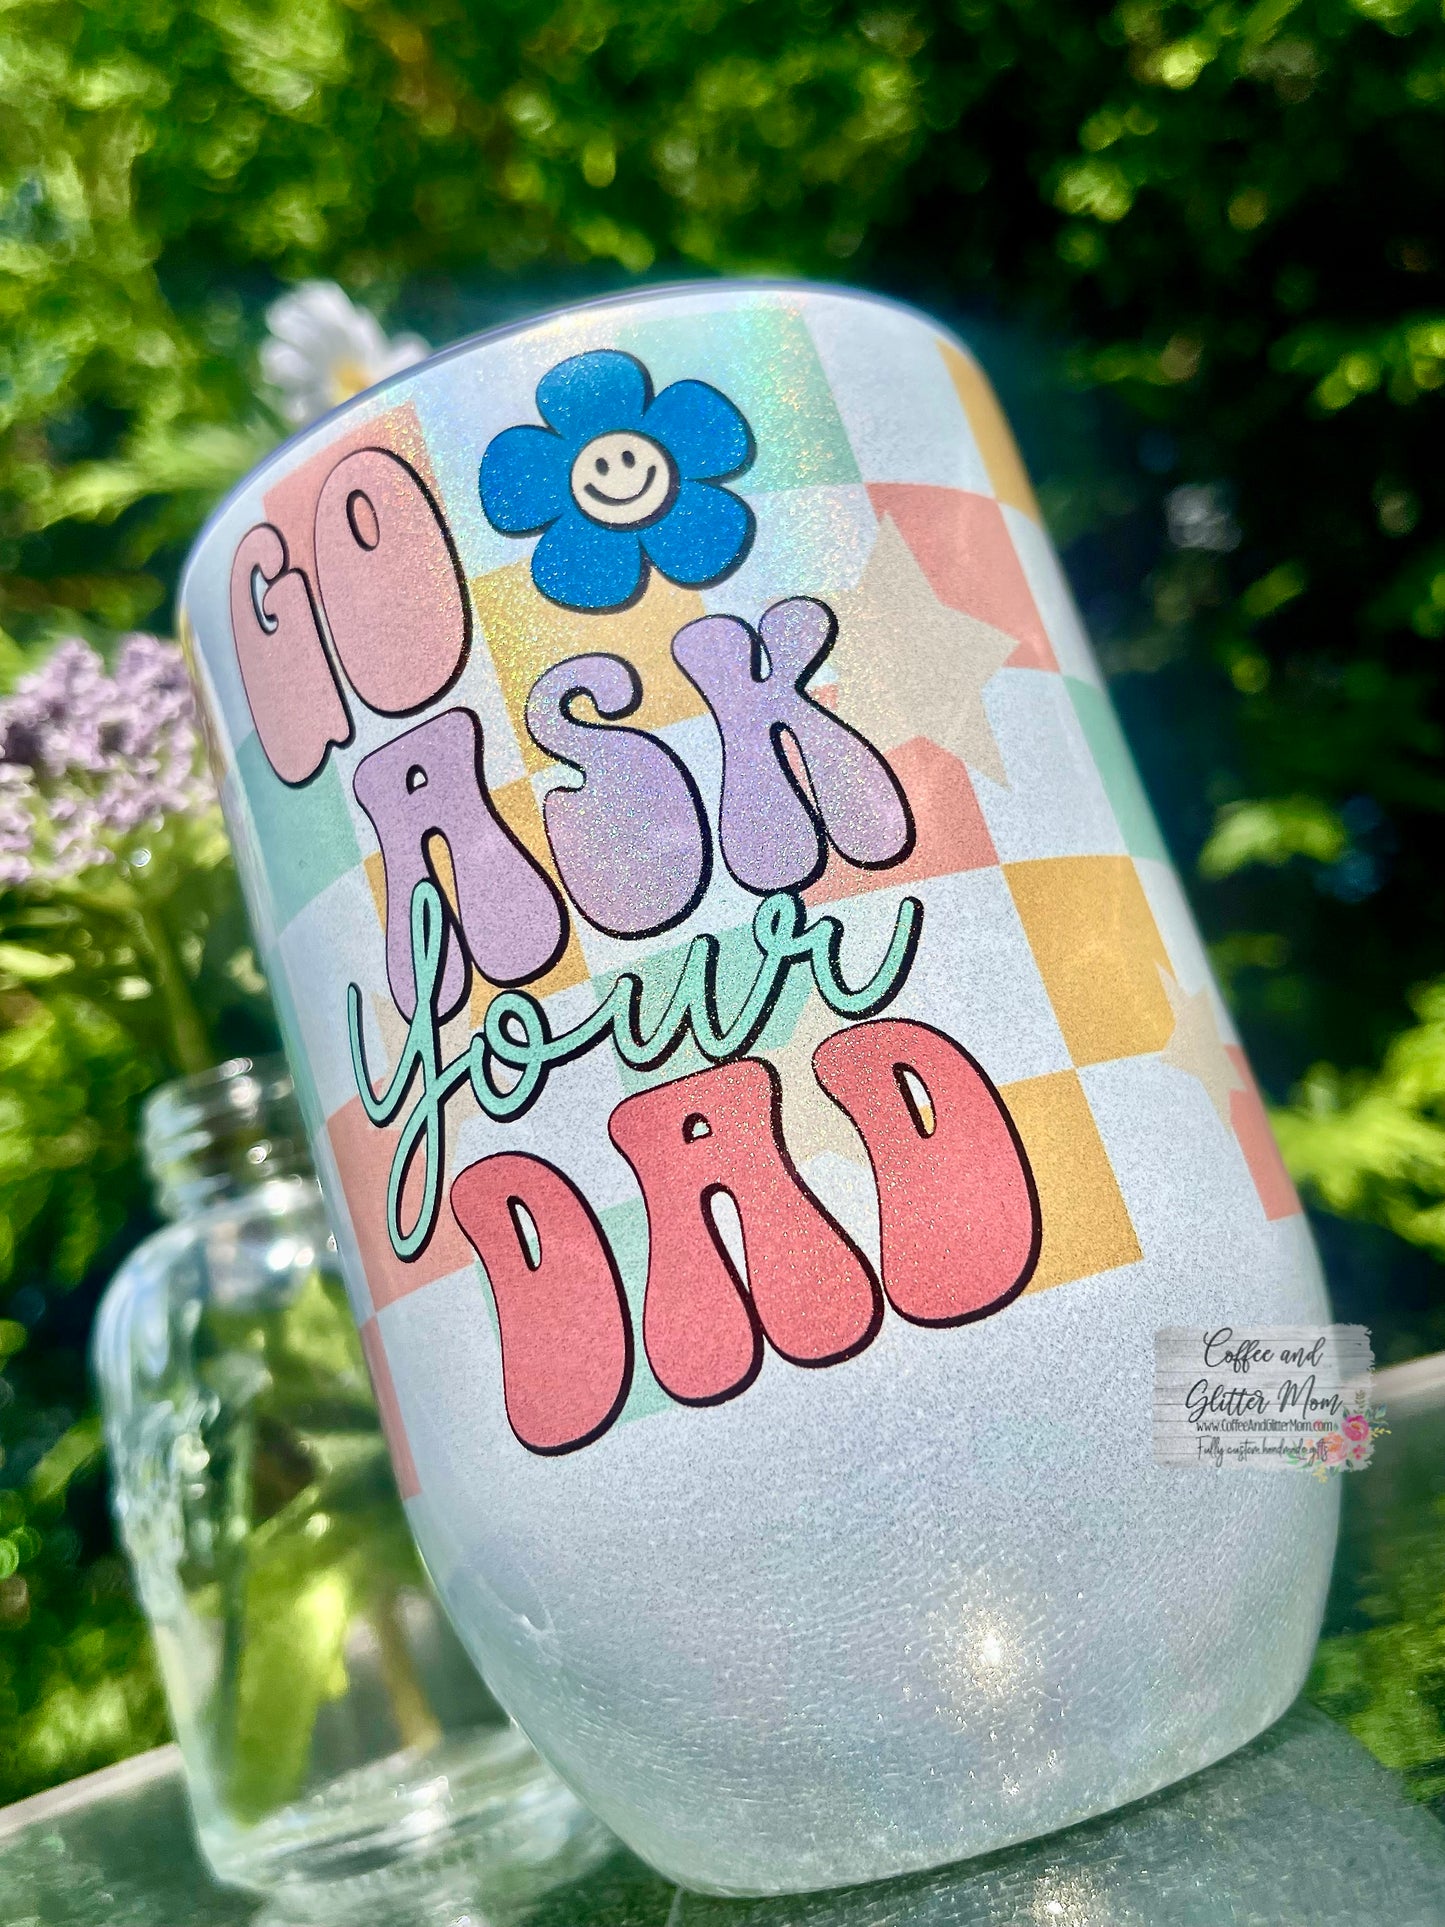 Go Ask Your Dad 12oz Holographic Sparkle Wine Tumbler